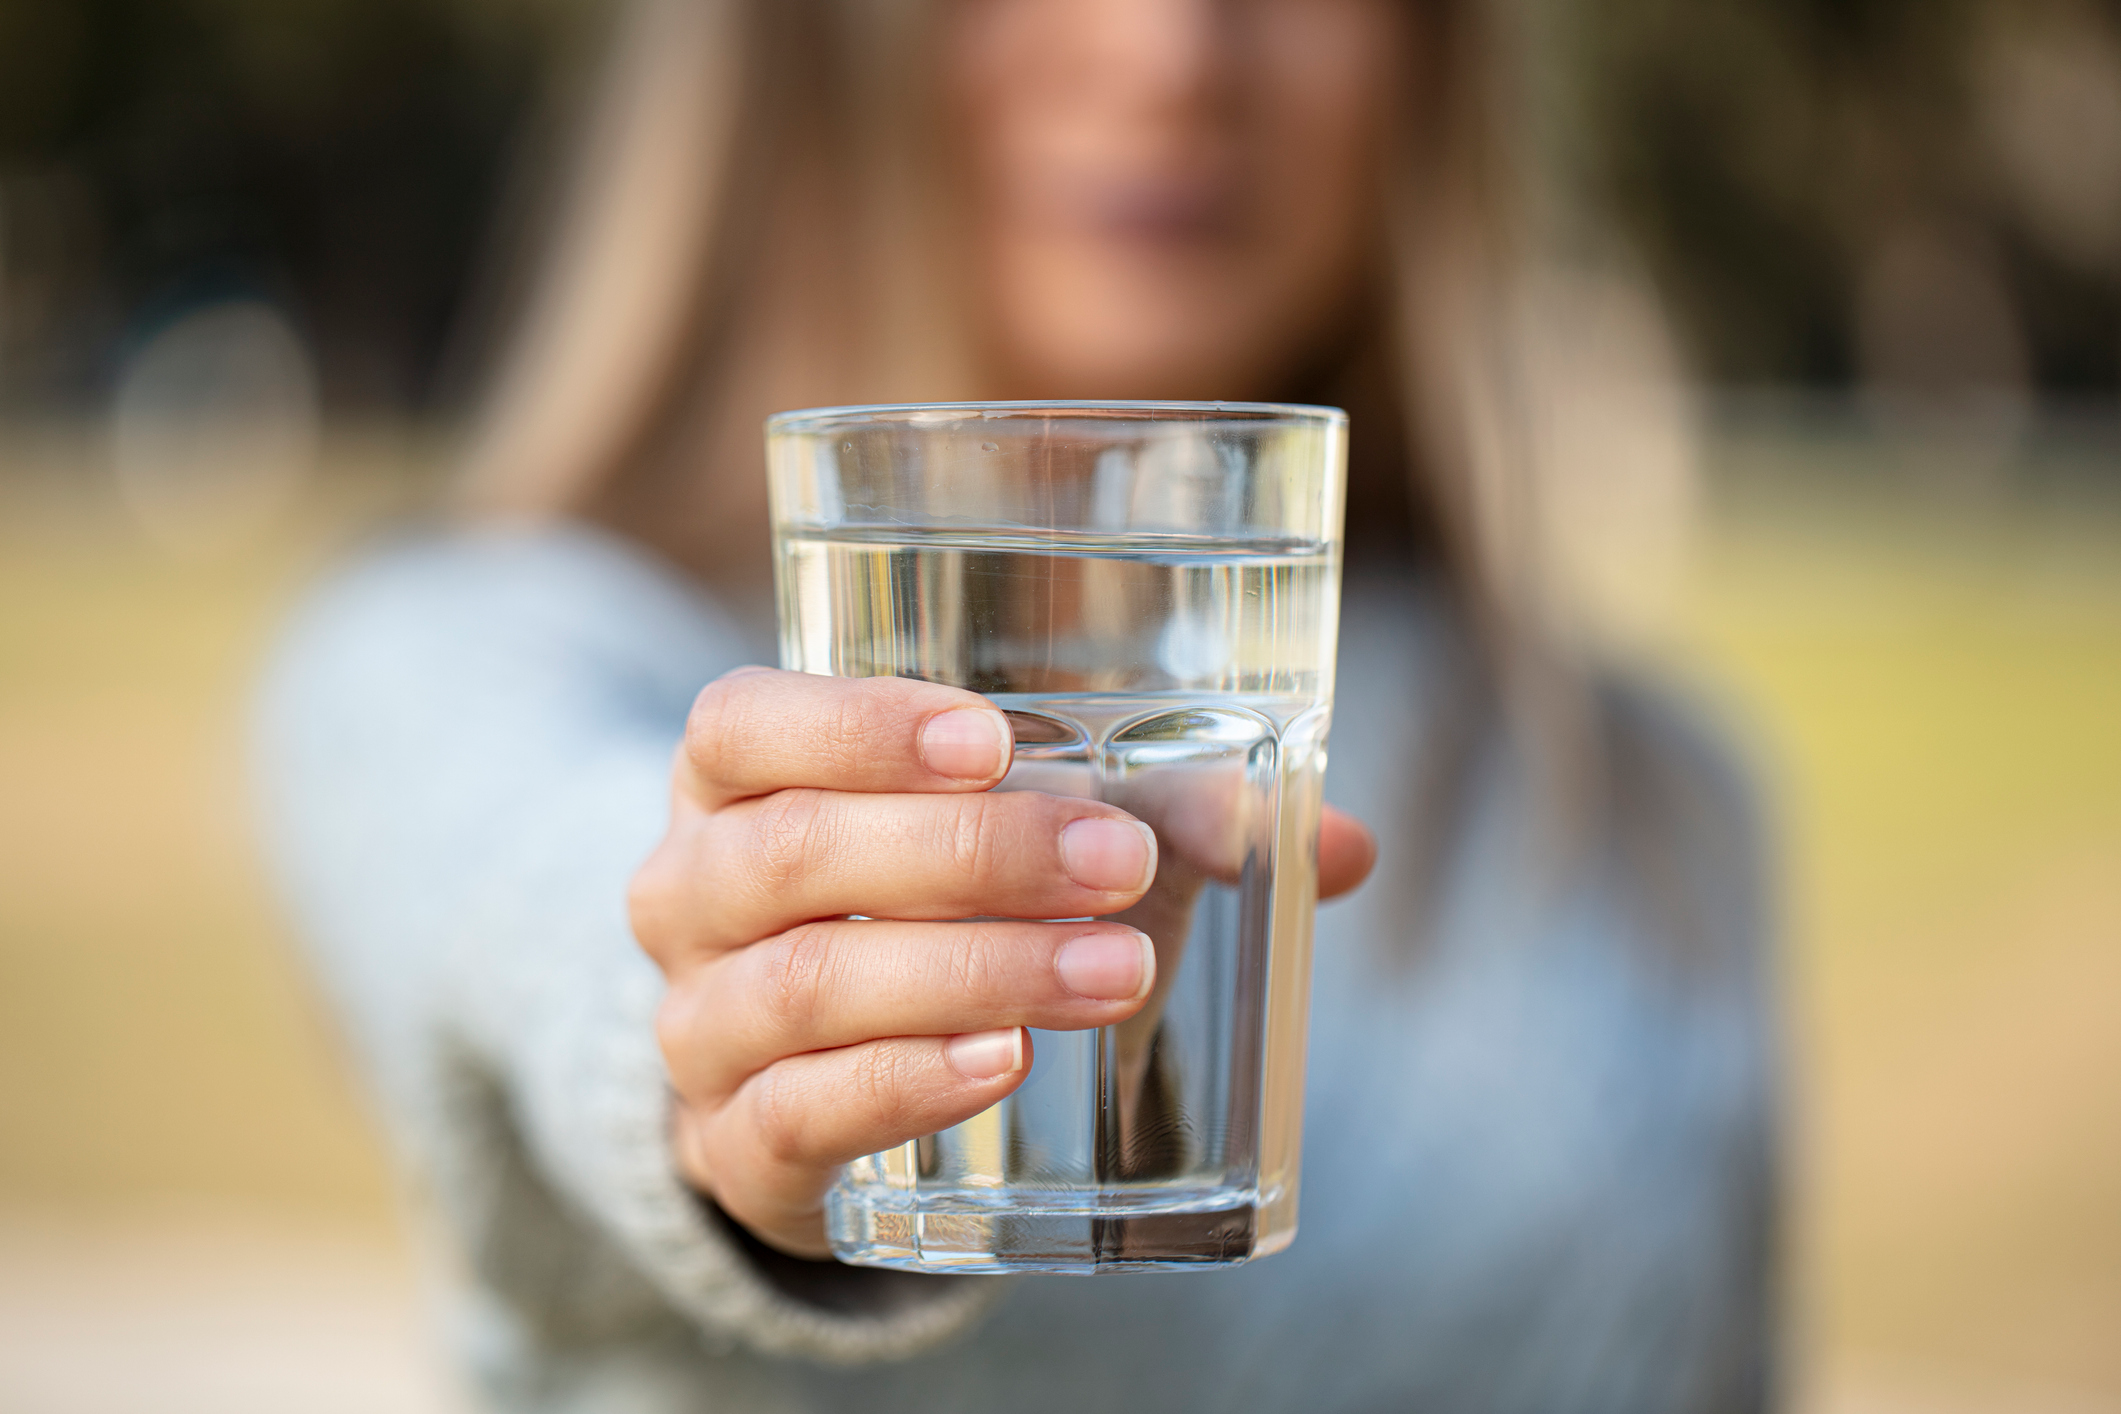 An image of a woman holding a glass of water, preparing to gargle.